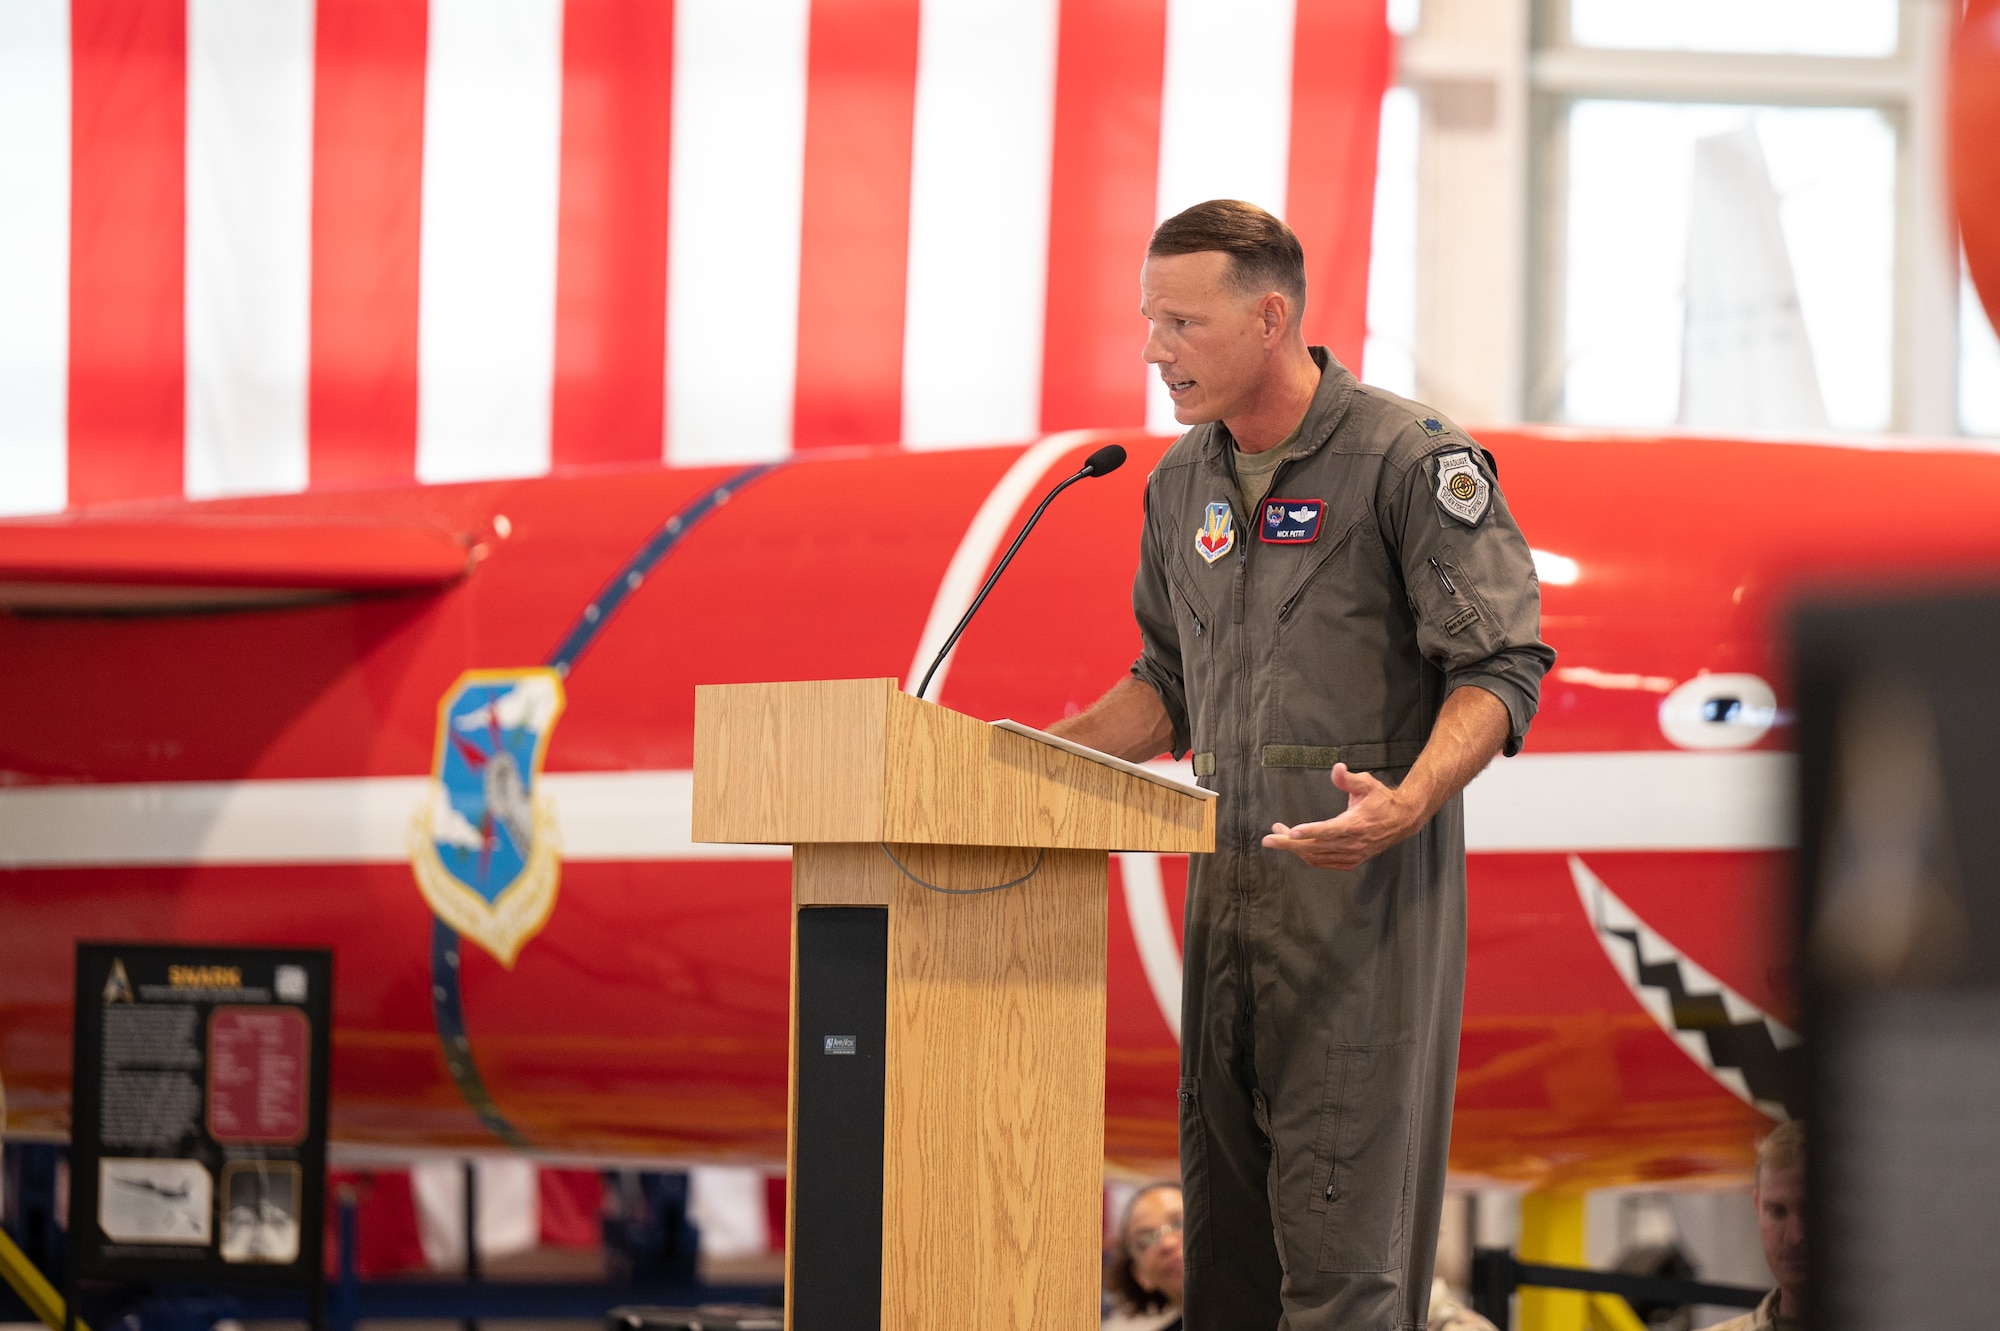 Lt. Col. Nick Pettit, commander, 1st Air Force, Detachment 3, addresses the crowd during a change of command ceremony, July 20, 2023 at Patrick Space Force Base, Fla.